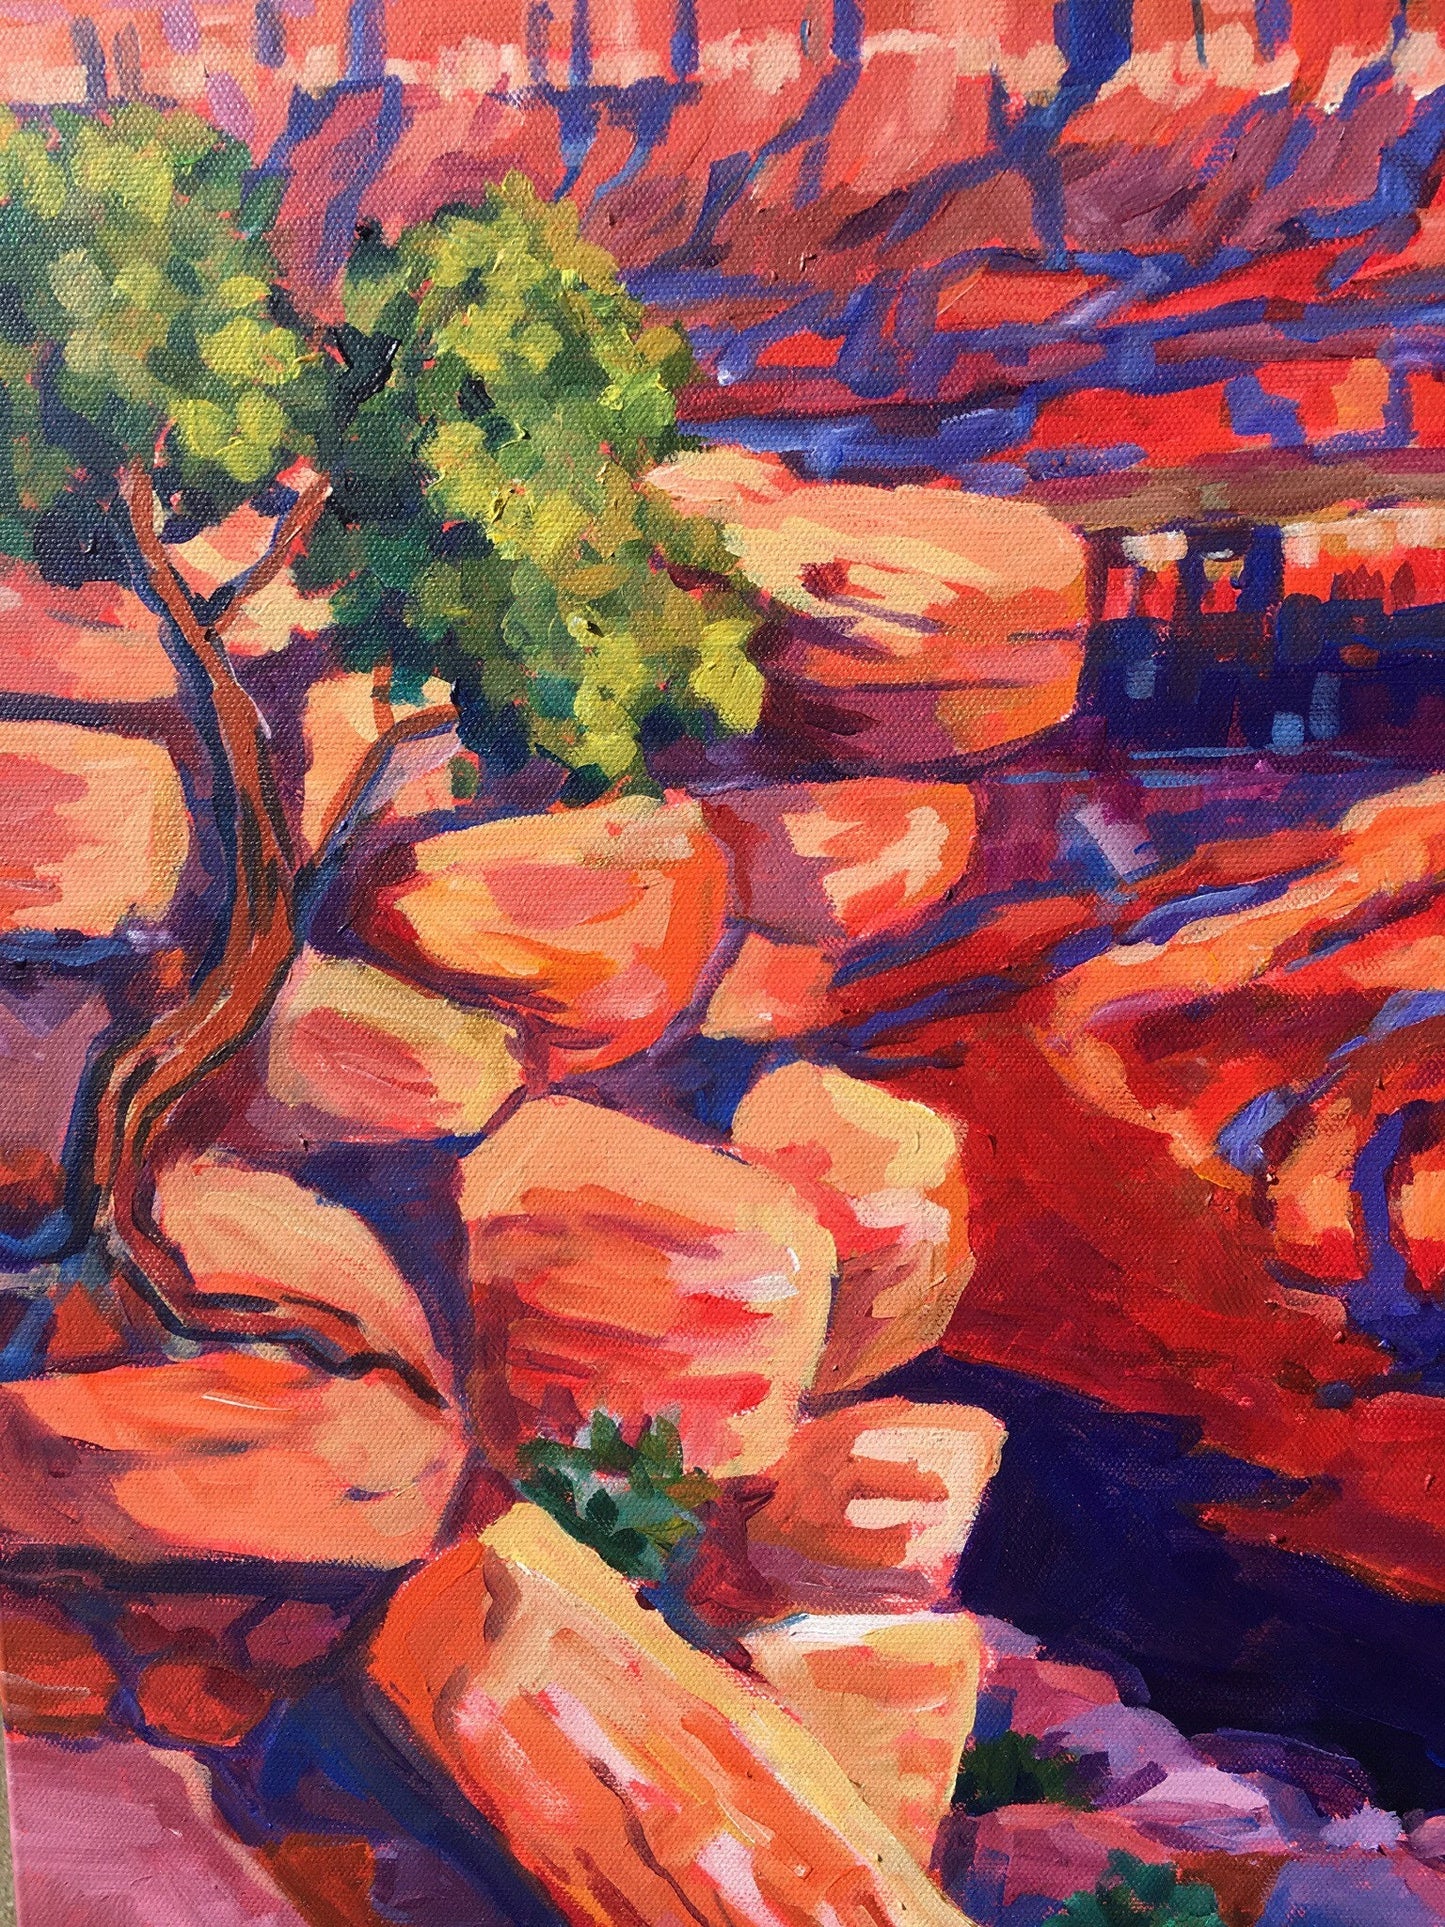 detail of the rocks and trees on painting